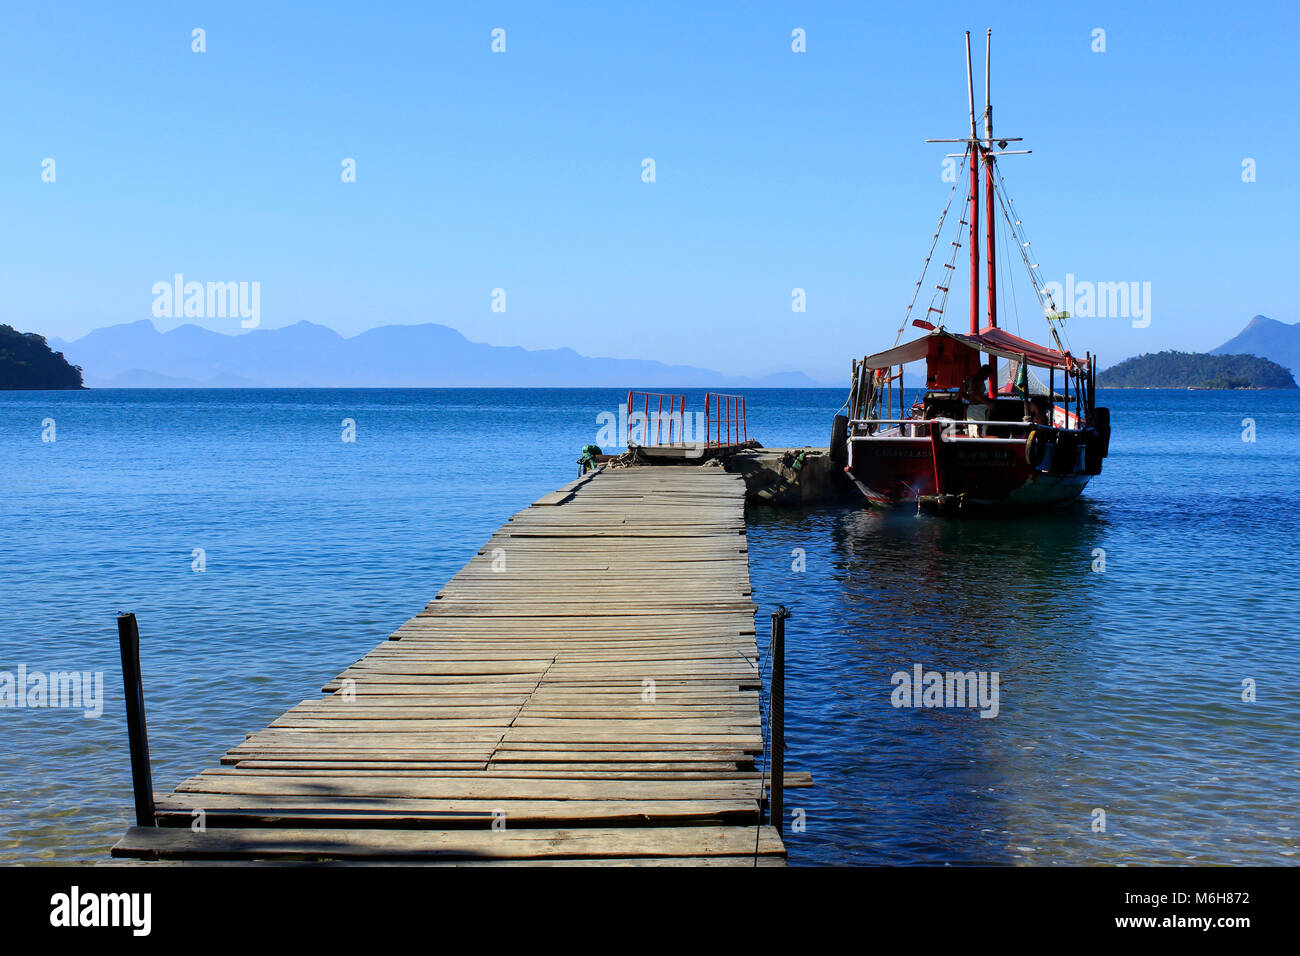 Sail boat docked at a pier on the beach in Ilha Grande, Brazil Stock Photo